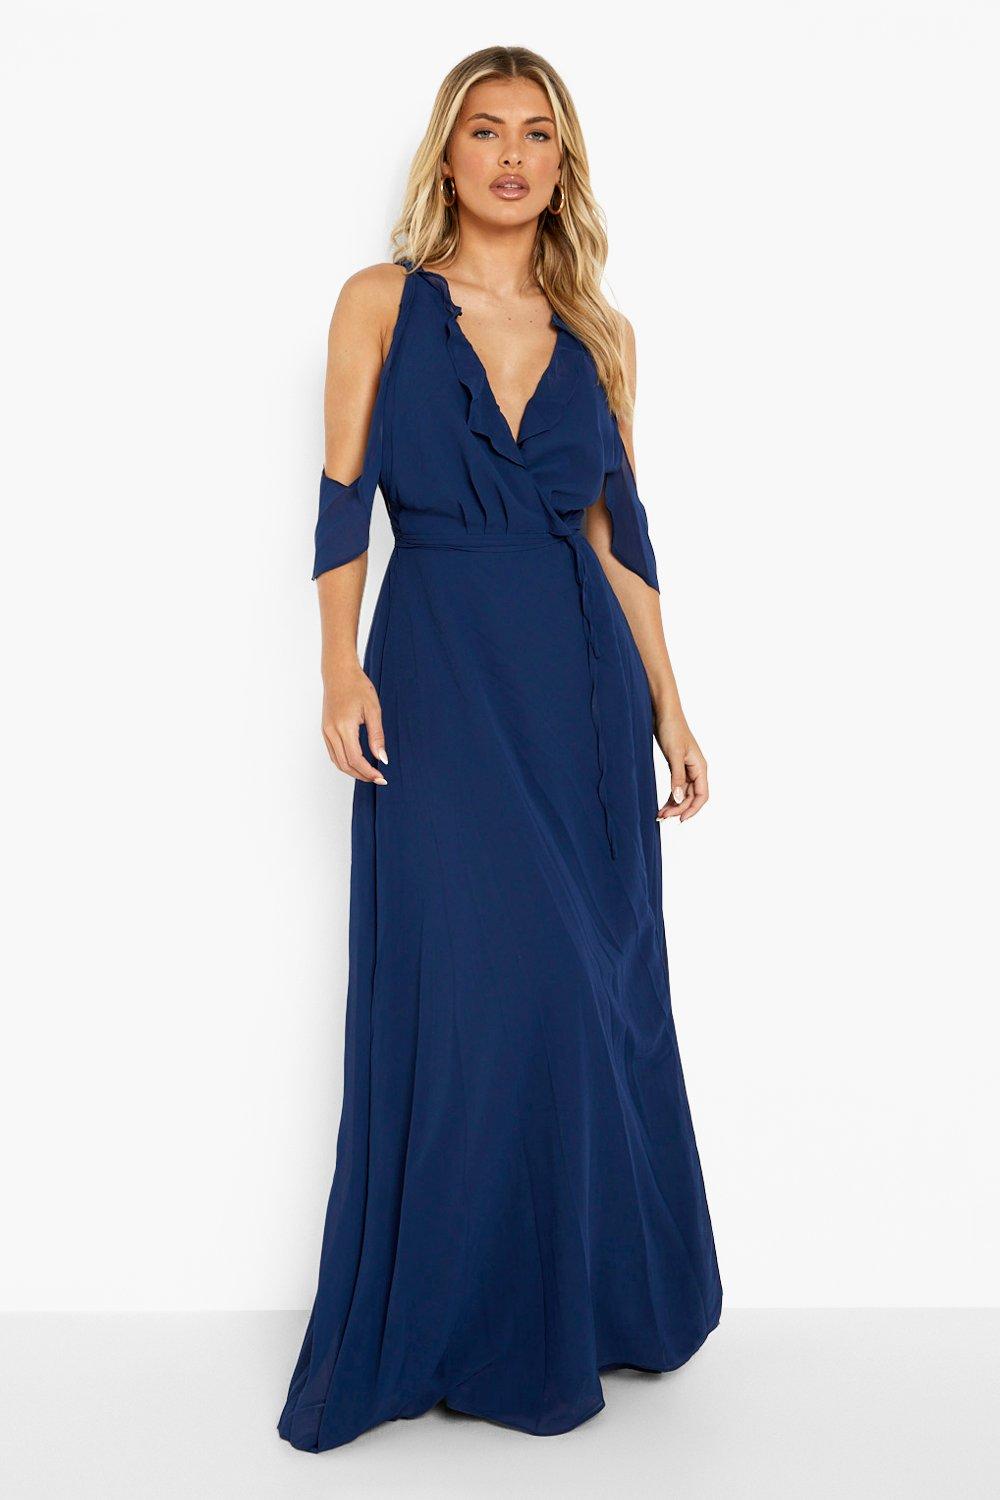 Chiffon maxi dress fashion at cheapest price - next day UK online delivery